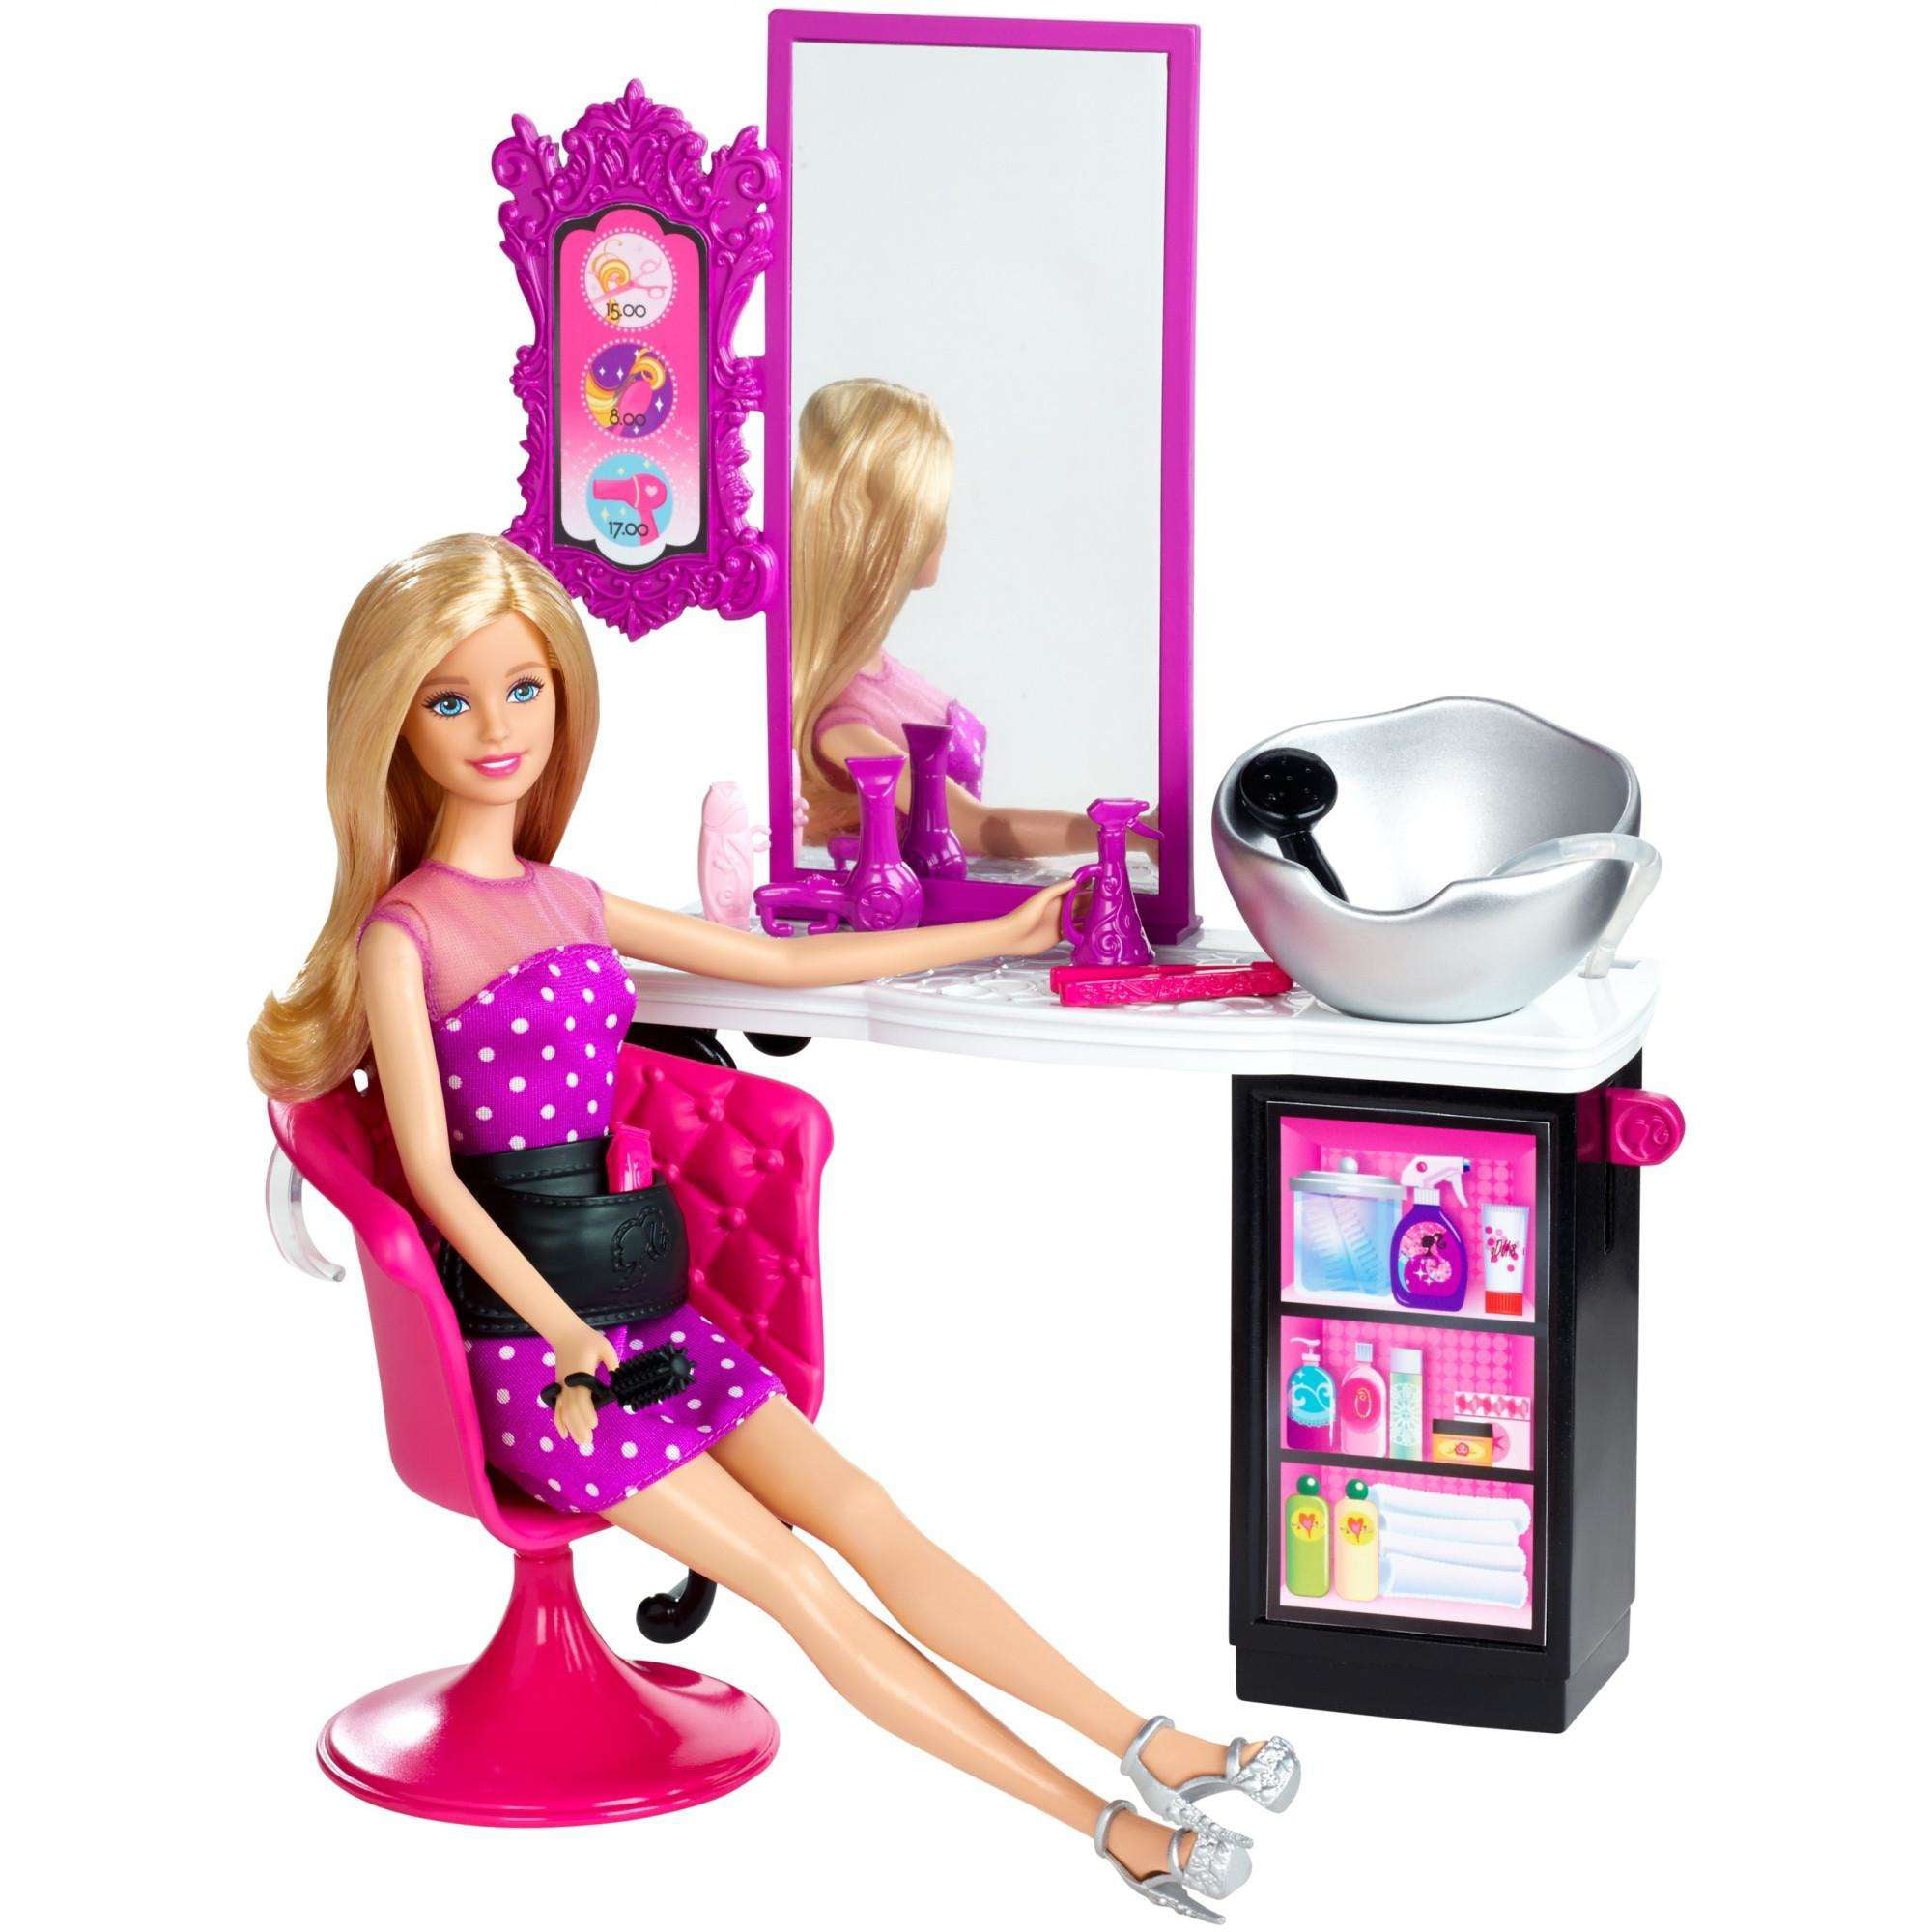 Barbie Malibu Ave Salon With Doll Playset Children Girls Toys 5 to 7 Years for sale online